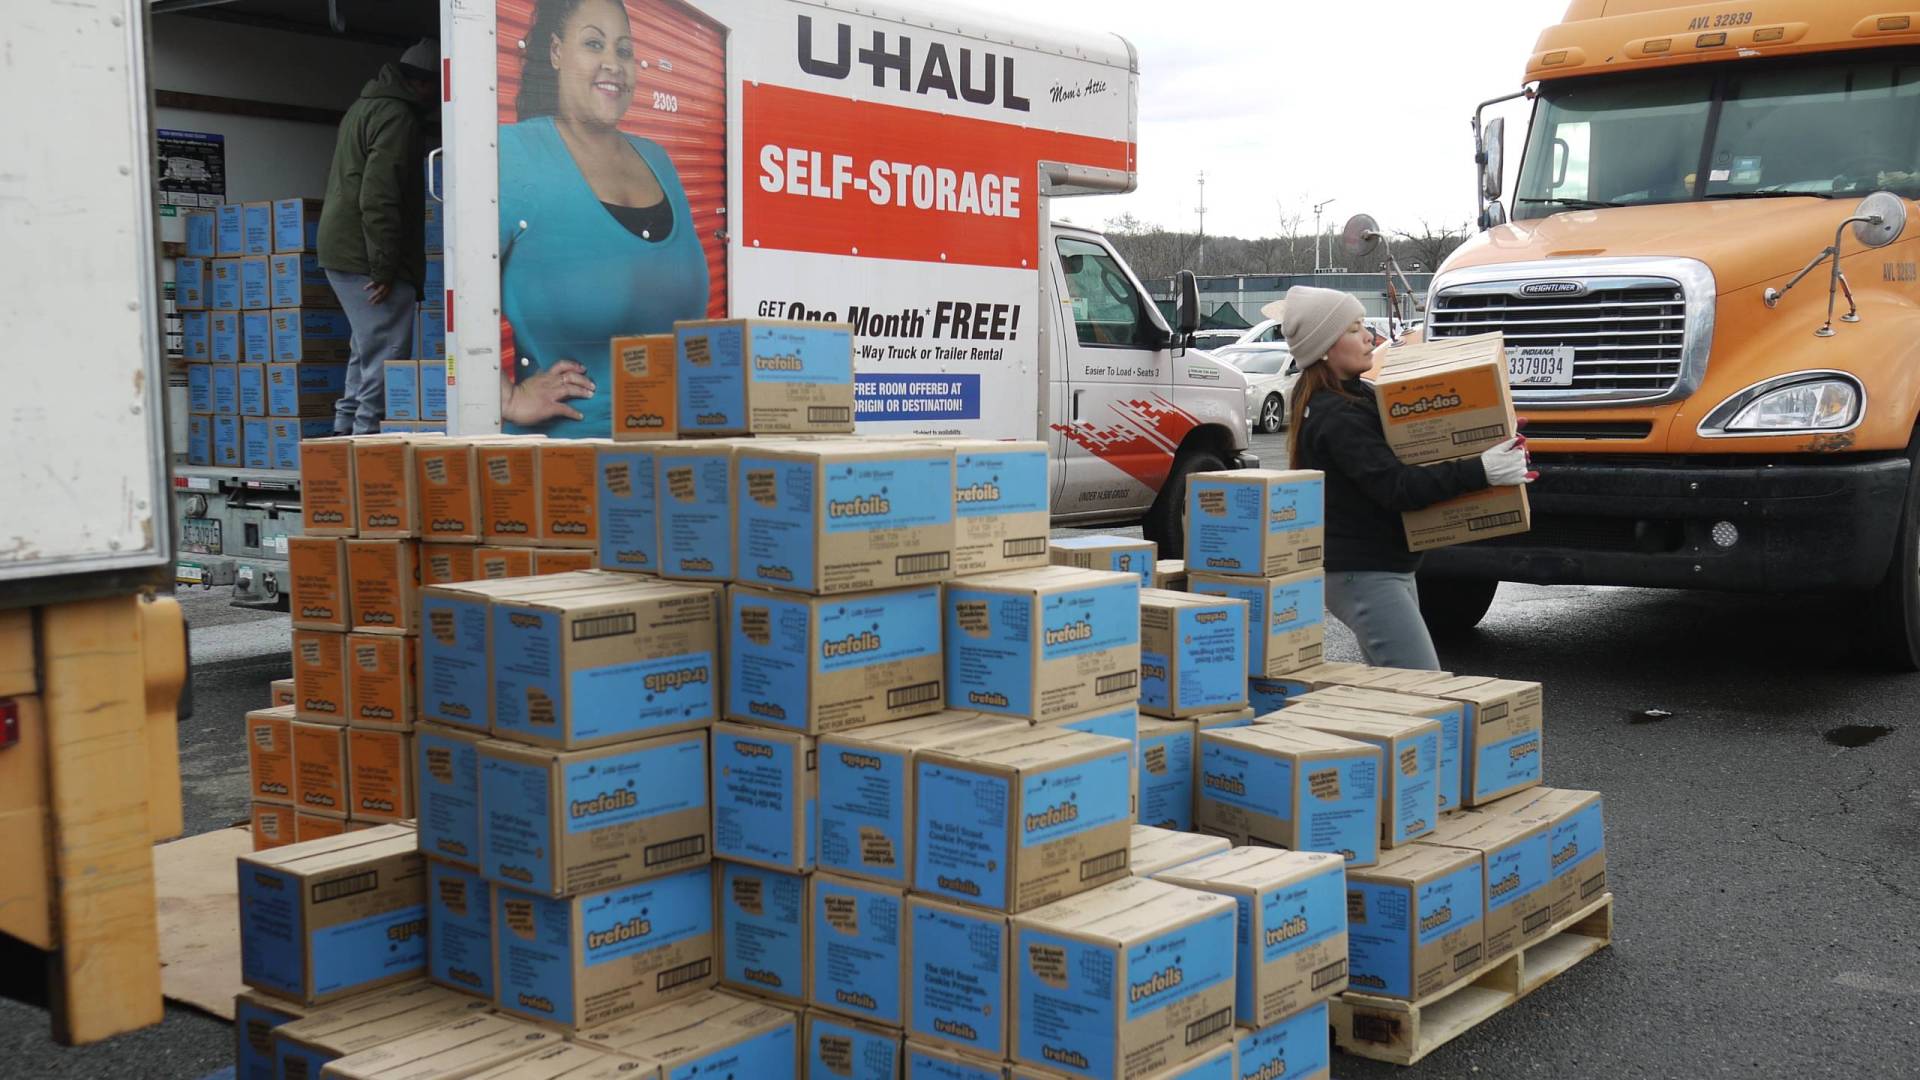 Piles of blue and brown boxes sit next to a U-Haul truck.